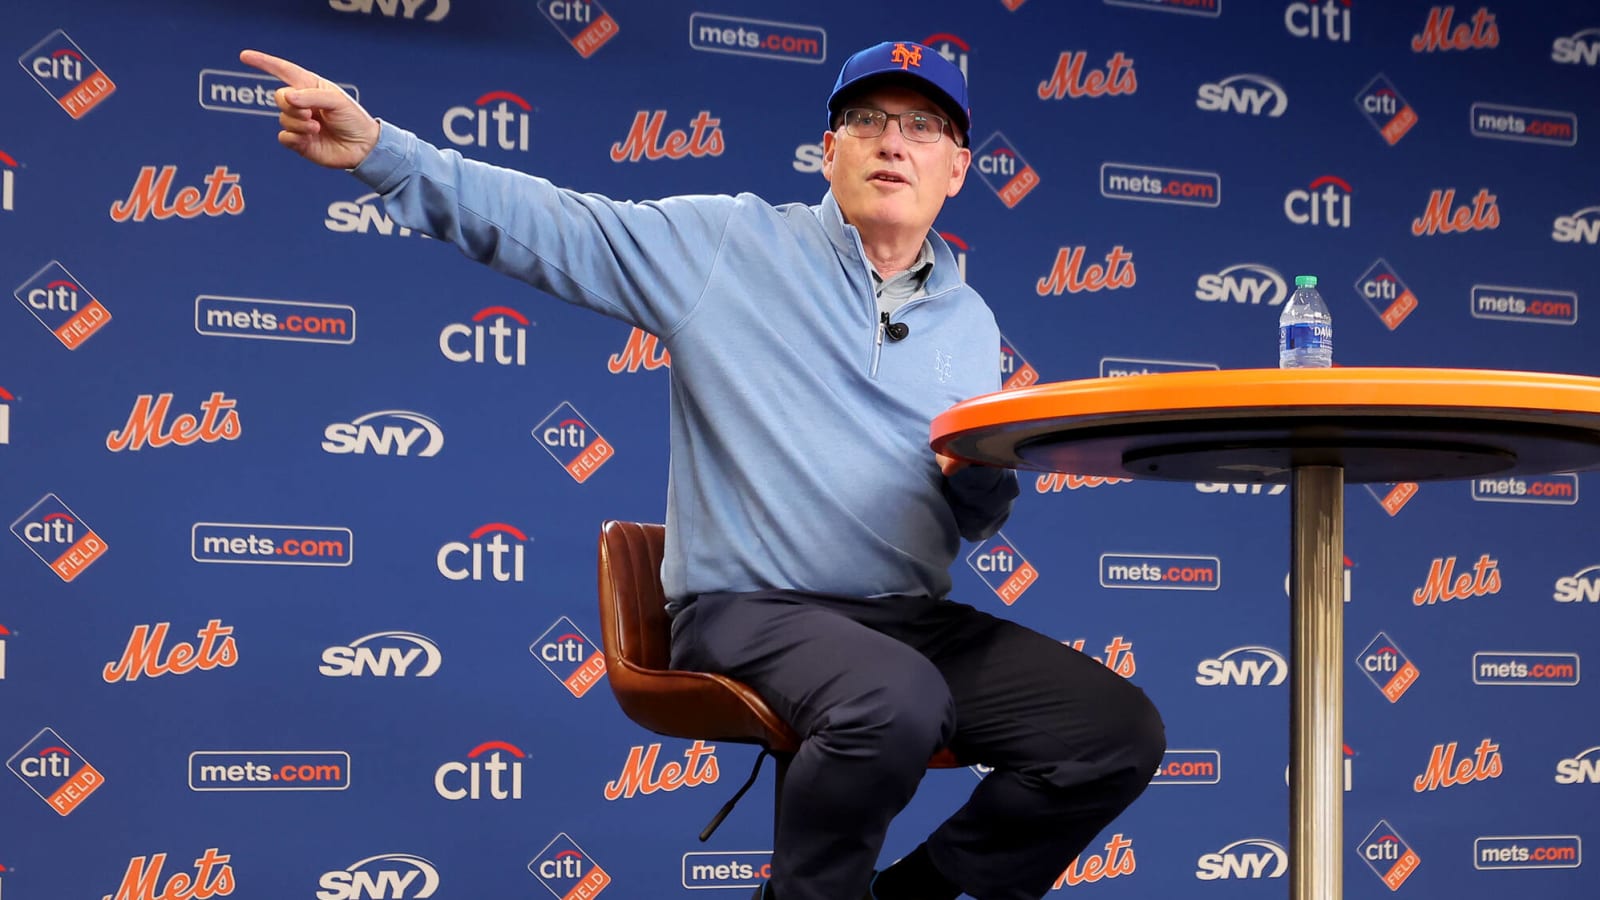 Mets Owner Apologizes To Fans After Trades, Pledges ‘Sustainable’ Future